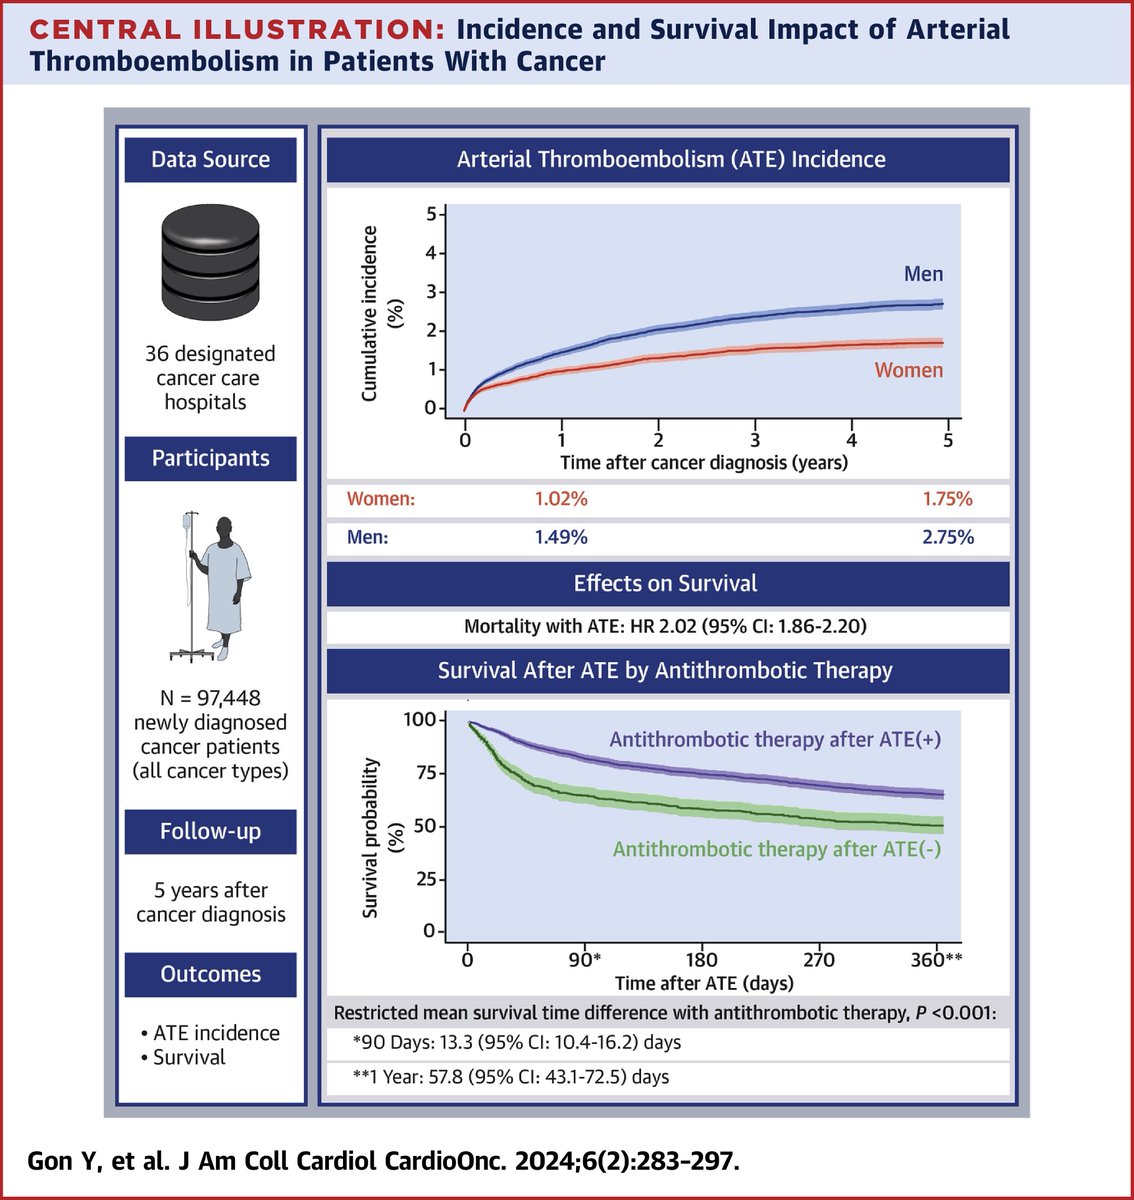 In a retrospective multicenter study of 97,448 cancer pts, antithrombotic therapy after arterial thromboembolism was linked to improved survival, w/ a significant difference in mean survival time between treated & untreated pts. bit.ly/3xmxmSV #JACCCardioOnc #ACCIntl